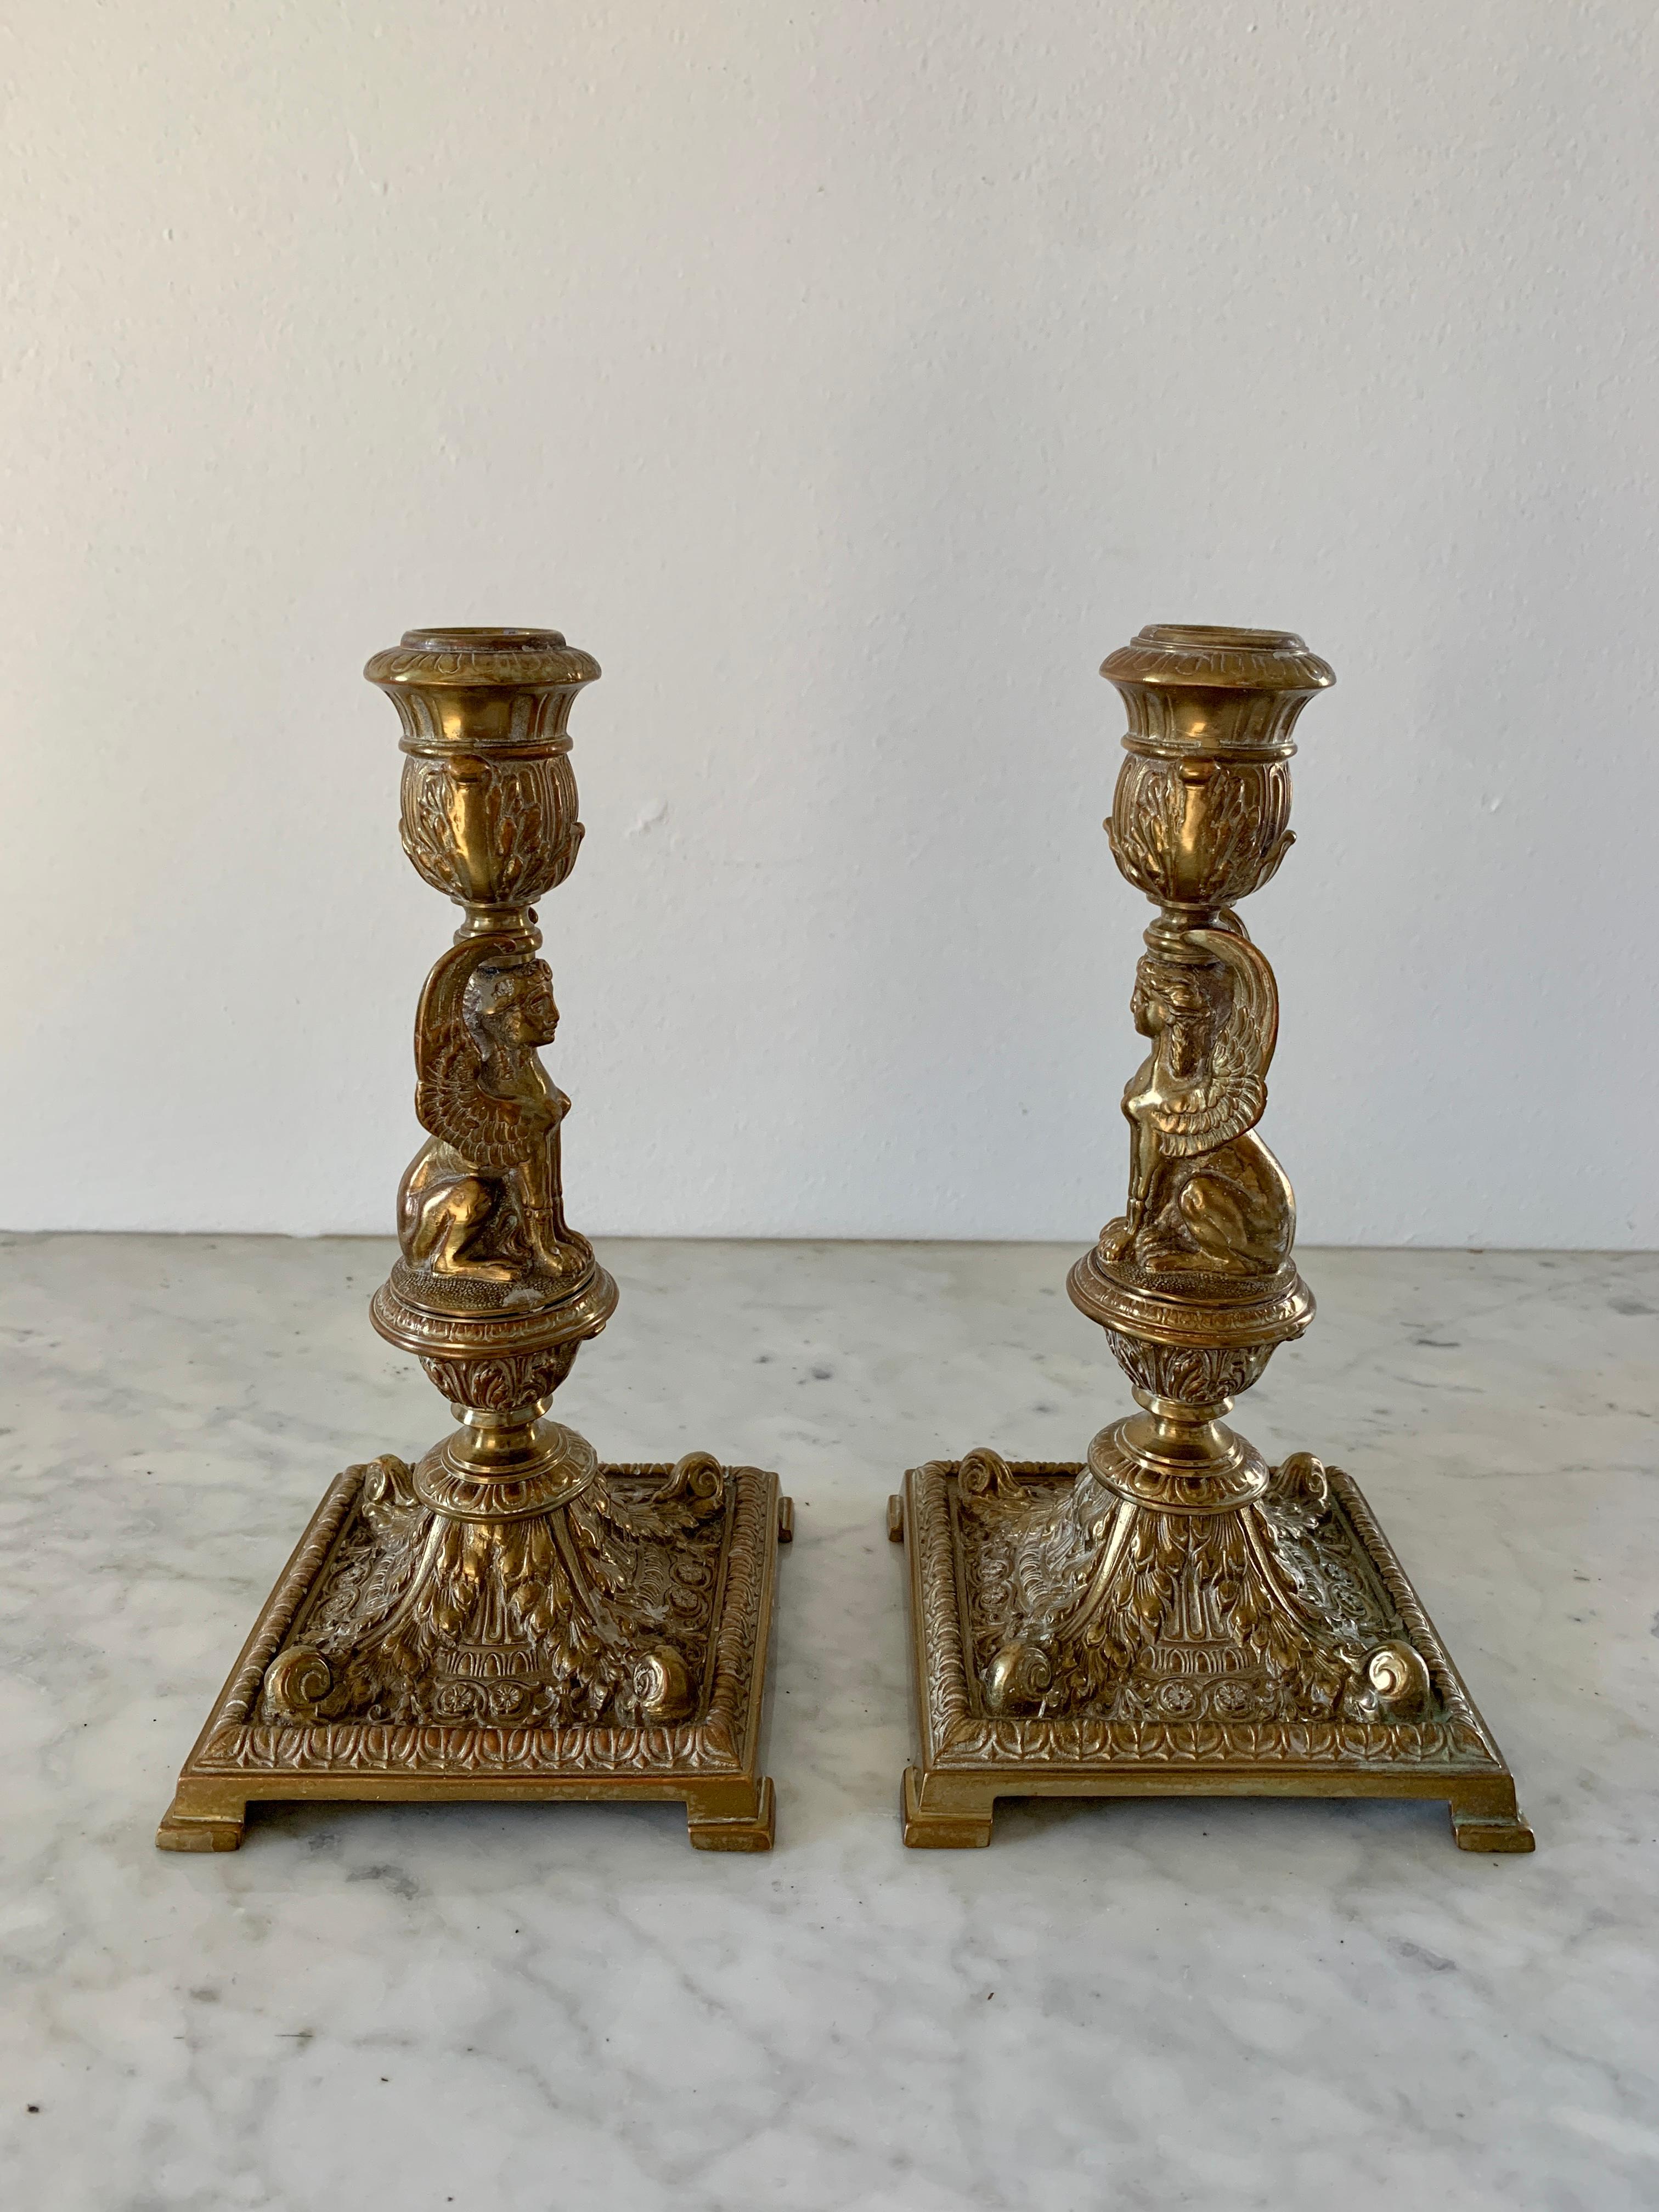 A wonderful pair of gilt bronze Egyptian Revival candlestick holders featuring Sphinxes.

Late 19th Century

Measures: 4.88